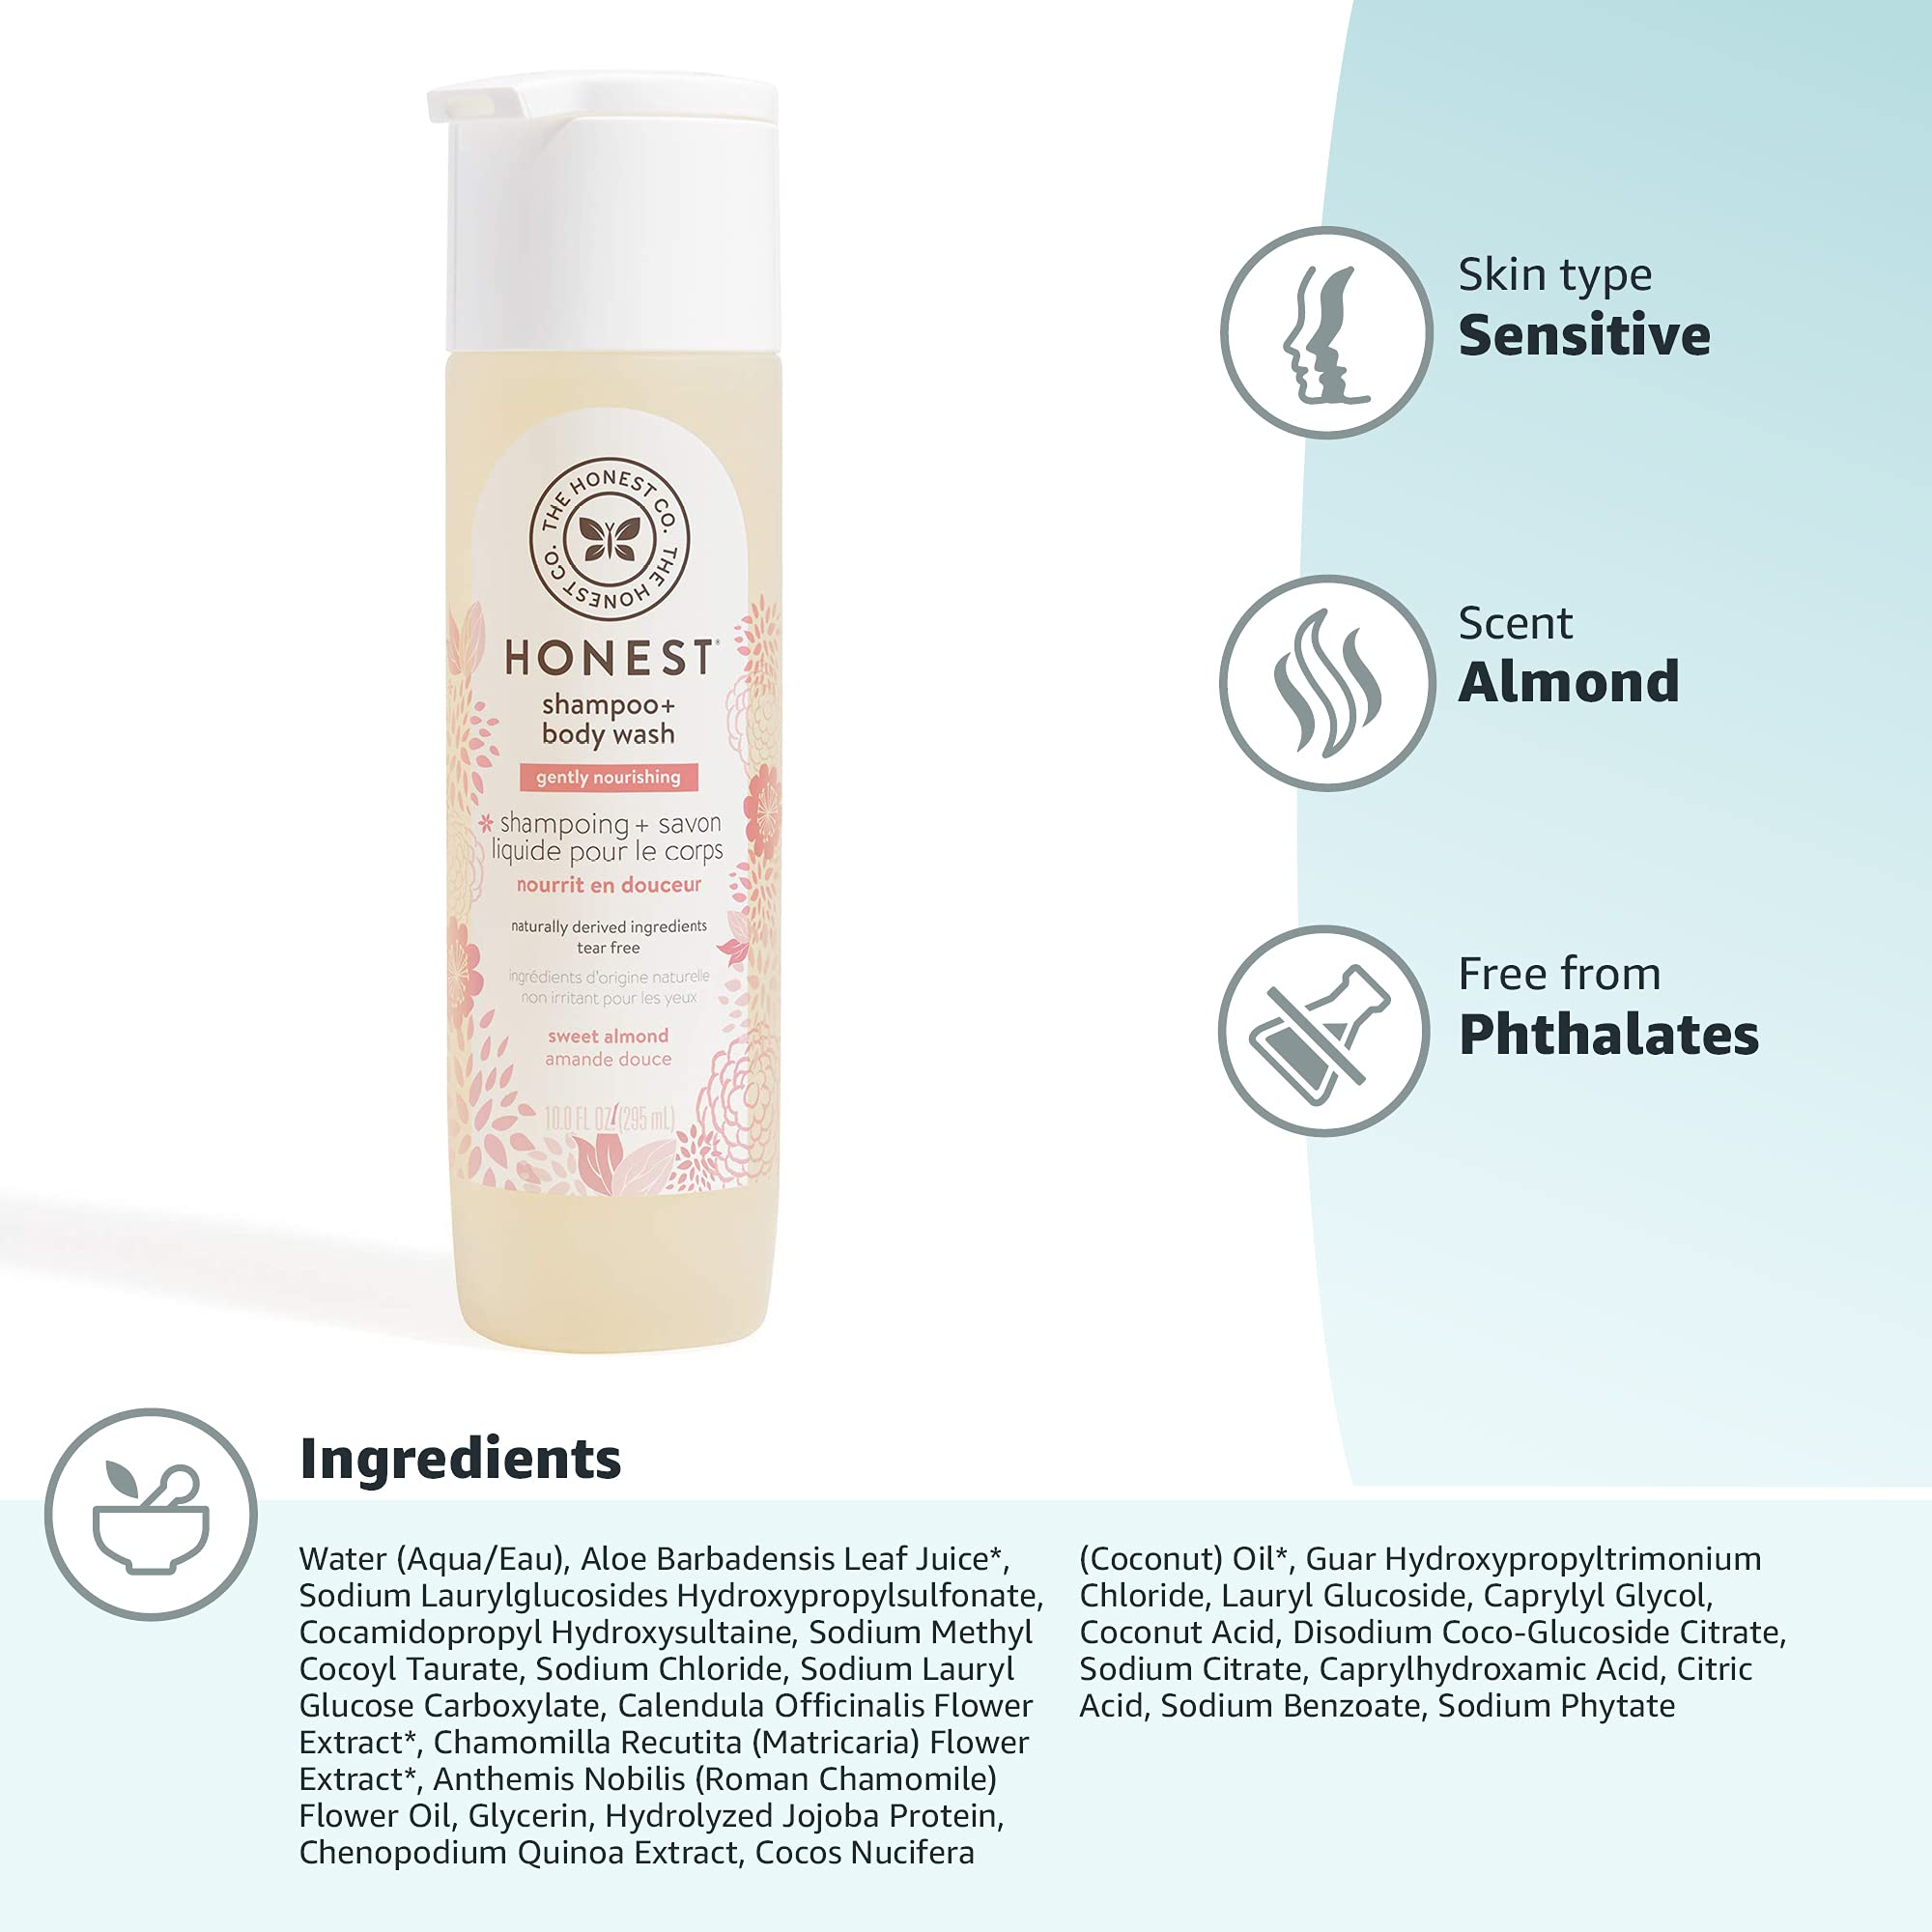 The Honest Company 2-in-1 Cleansing Shampoo + Body Wash | Gentle for Baby | Naturally Derived, Tear-free, Hypoallergenic | Sweet Almond Nourish, 10 fl oz